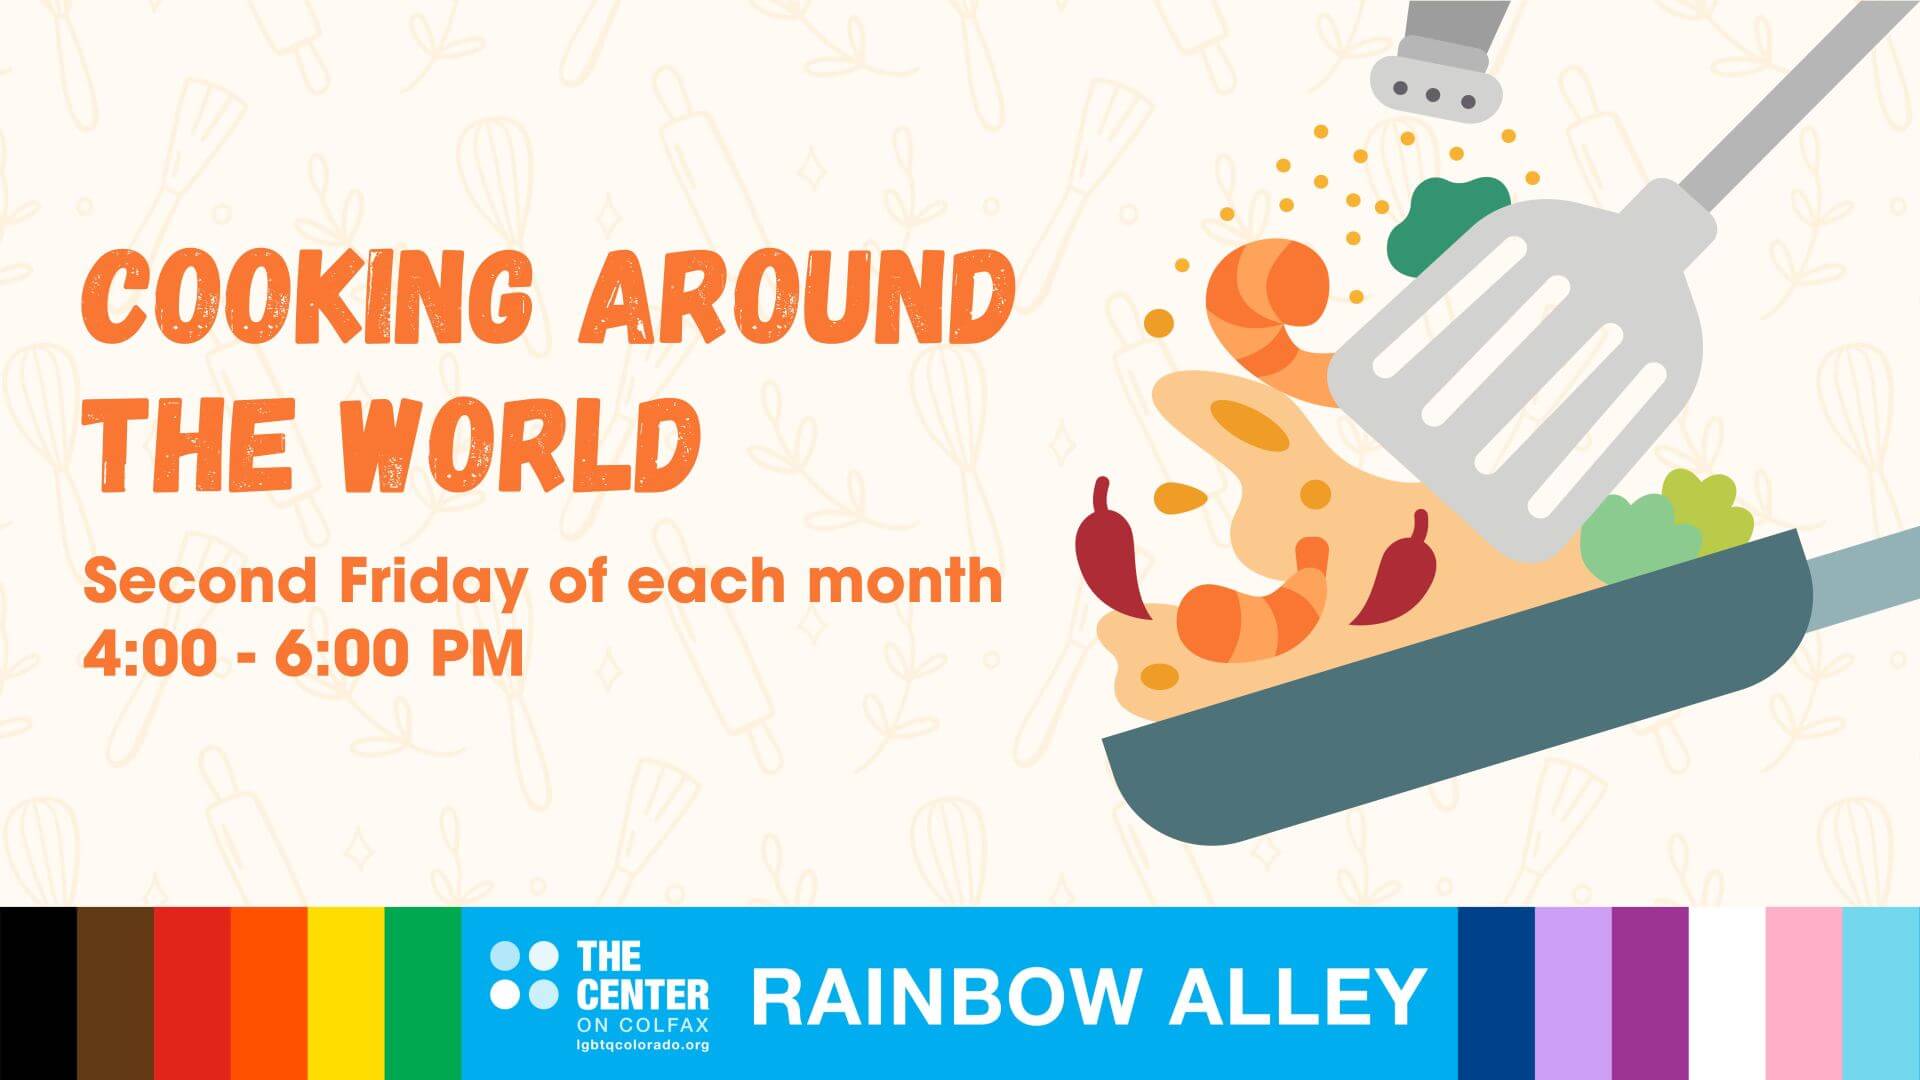 Cooking around the world - second Friday of each month, 4:00 - 6:00 PM